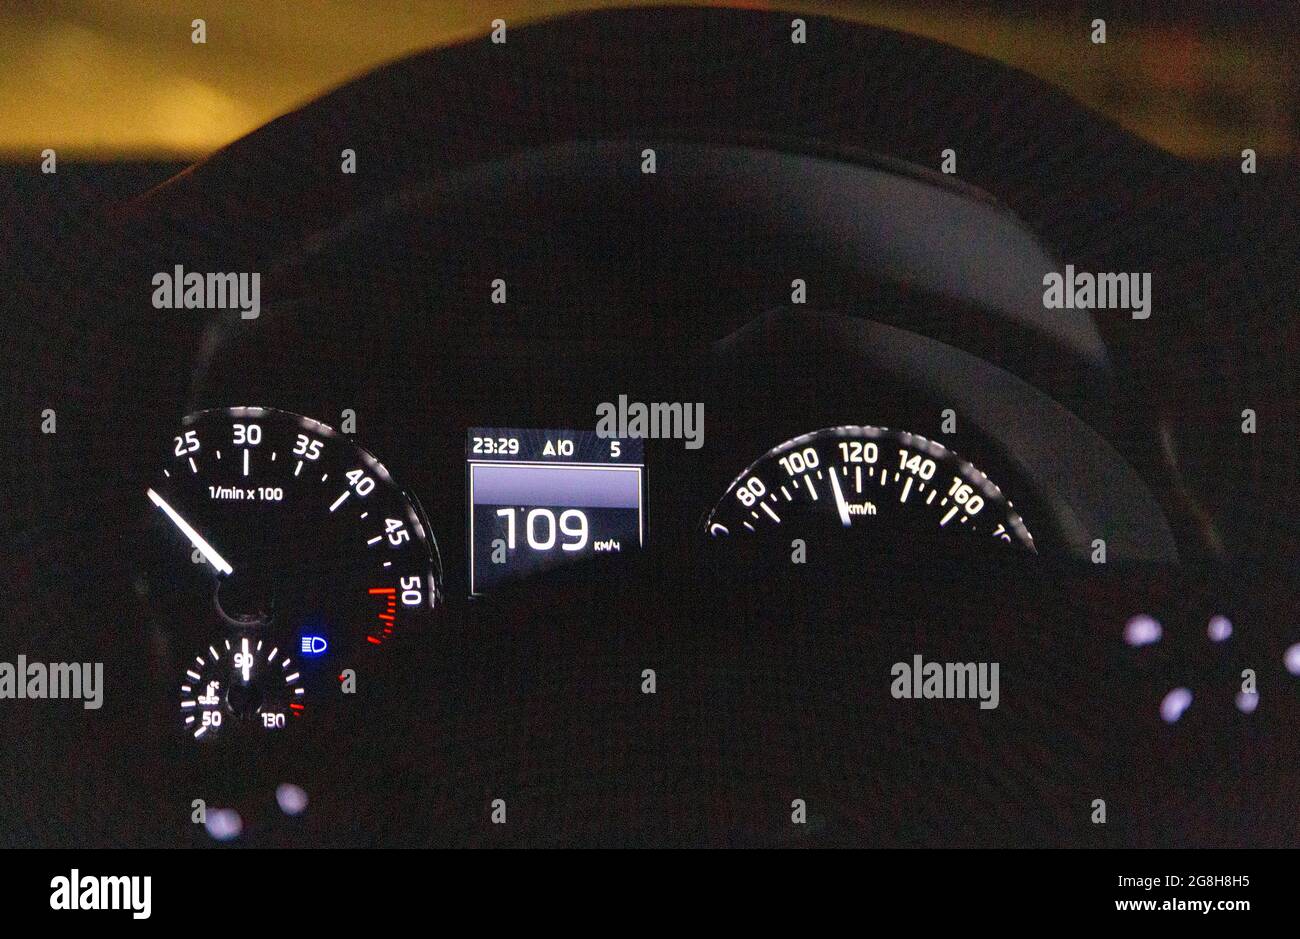 A modern car with illumination of the dashboard close-up, moving at a speed of 109 km. Photo taken through the steering wheel Stock Photo